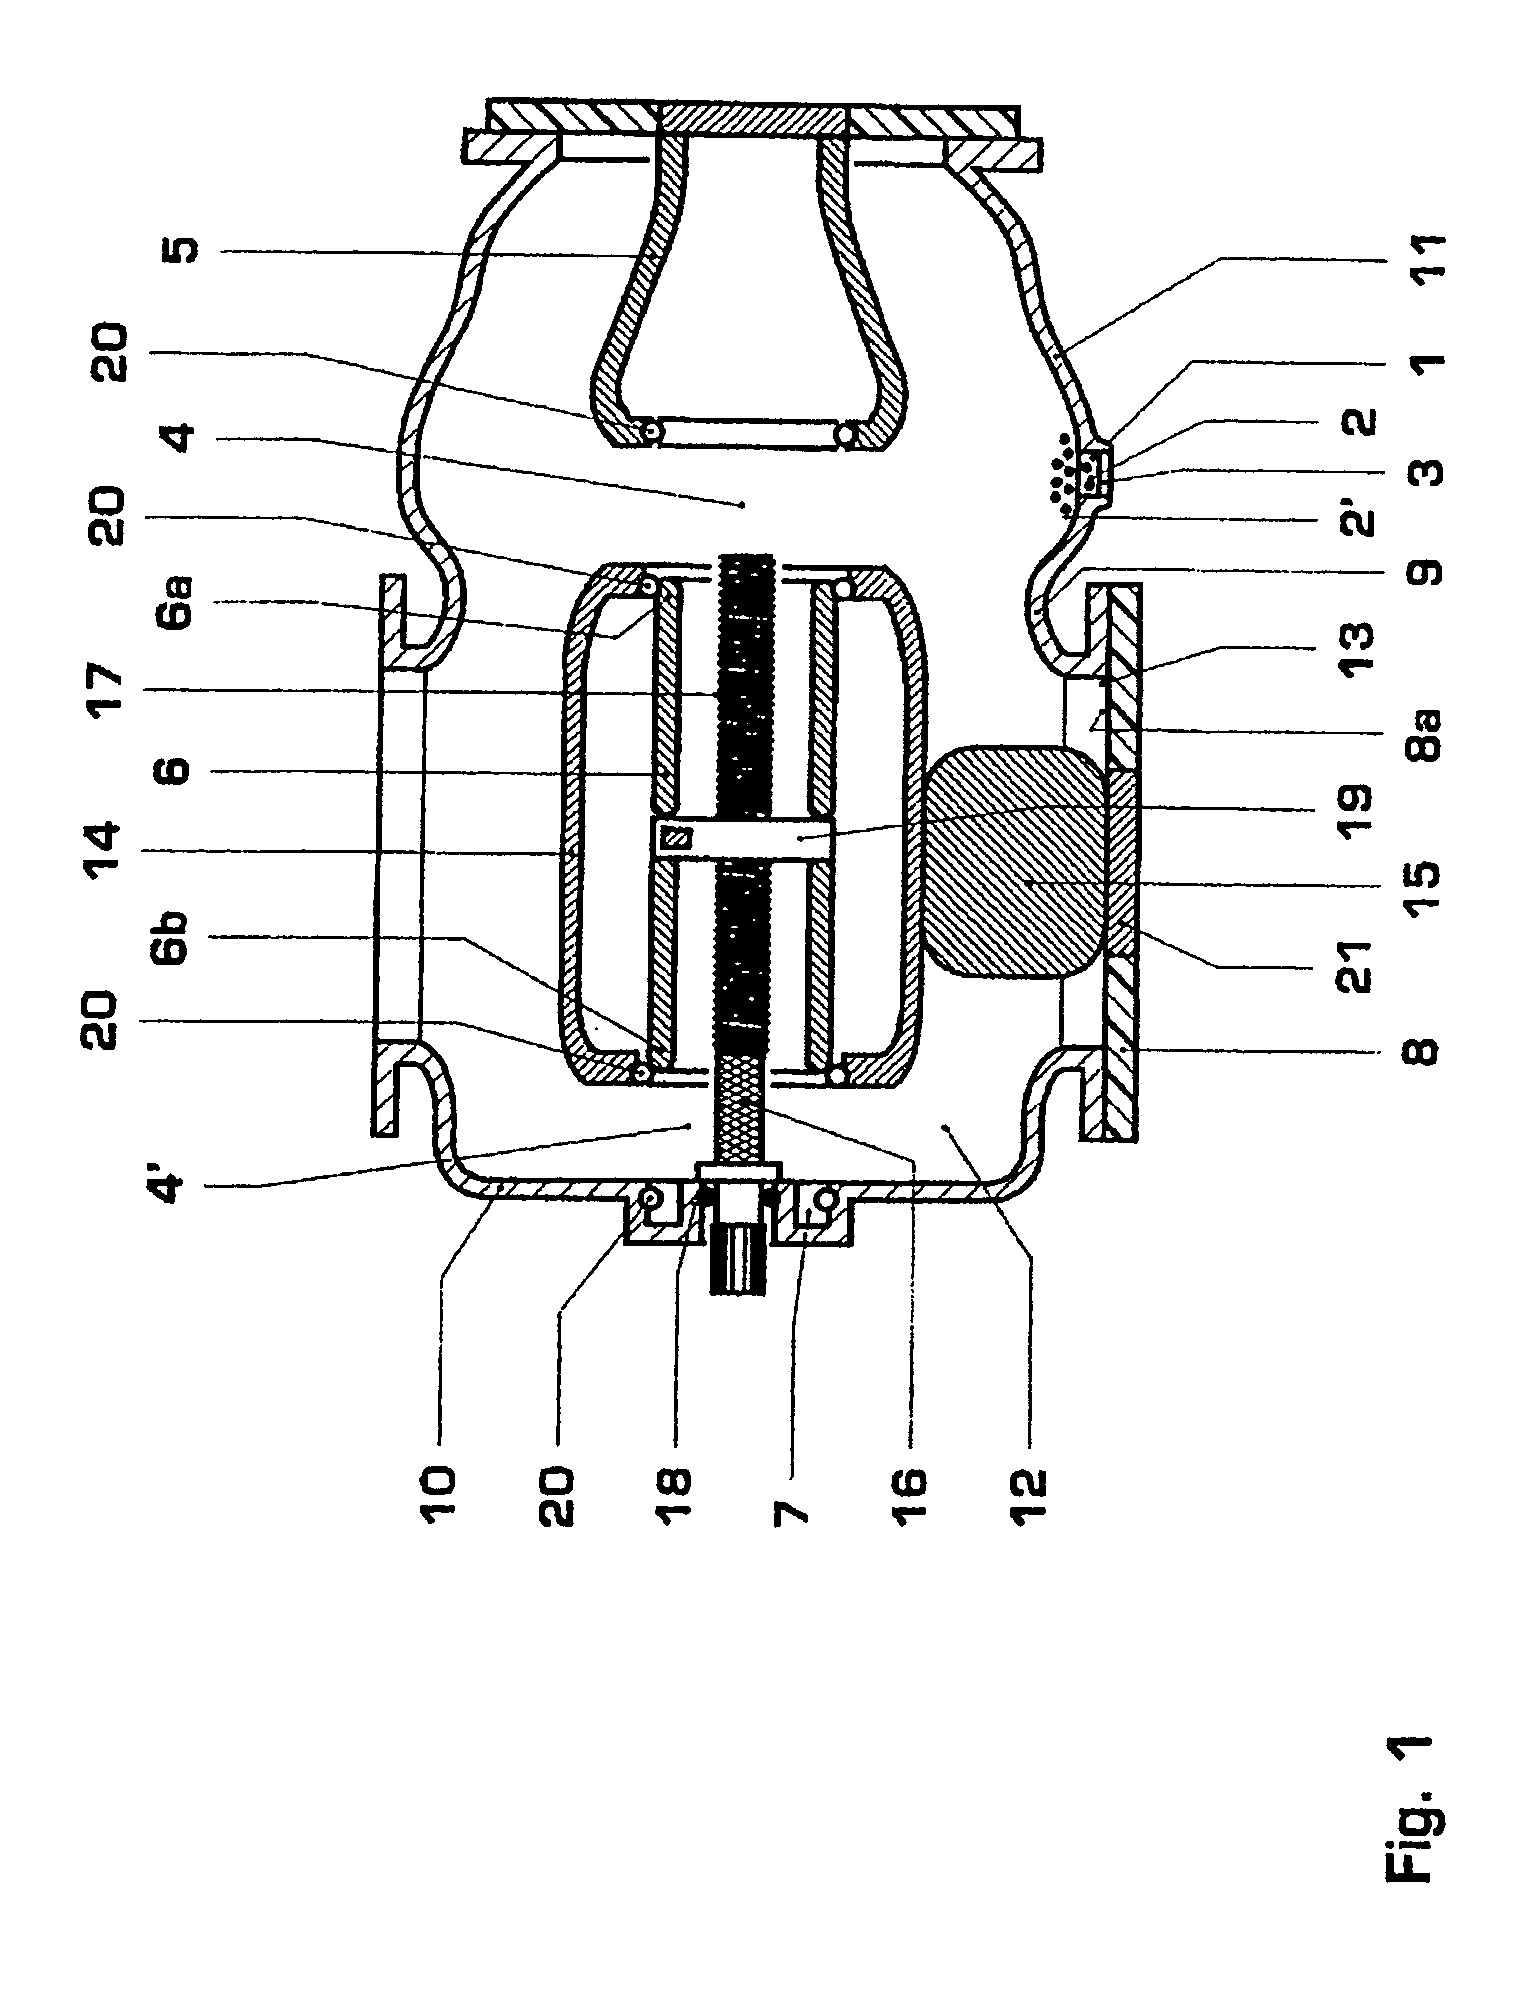 High voltage device with a particle trap